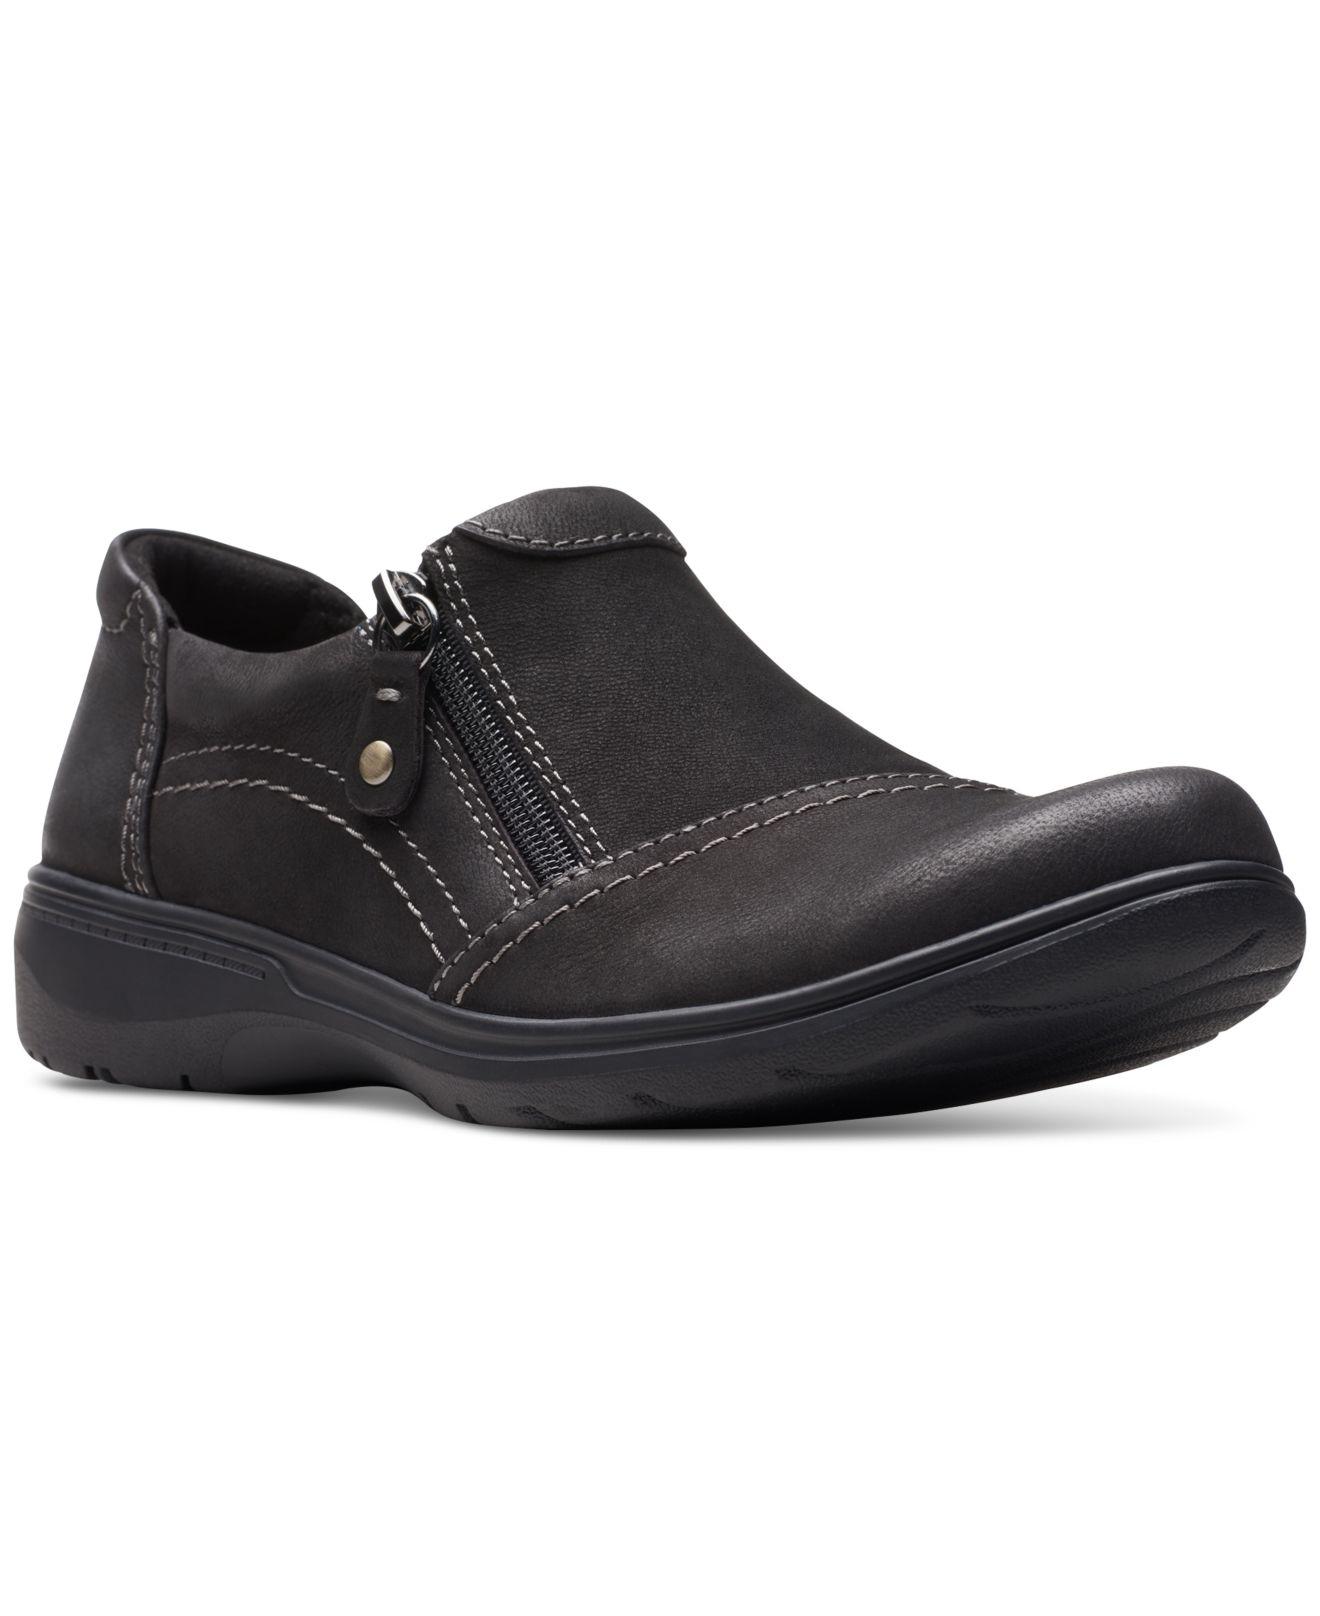 Clarks Carleigh Ray Round-toe Side-zip Shoes in Black | Lyst